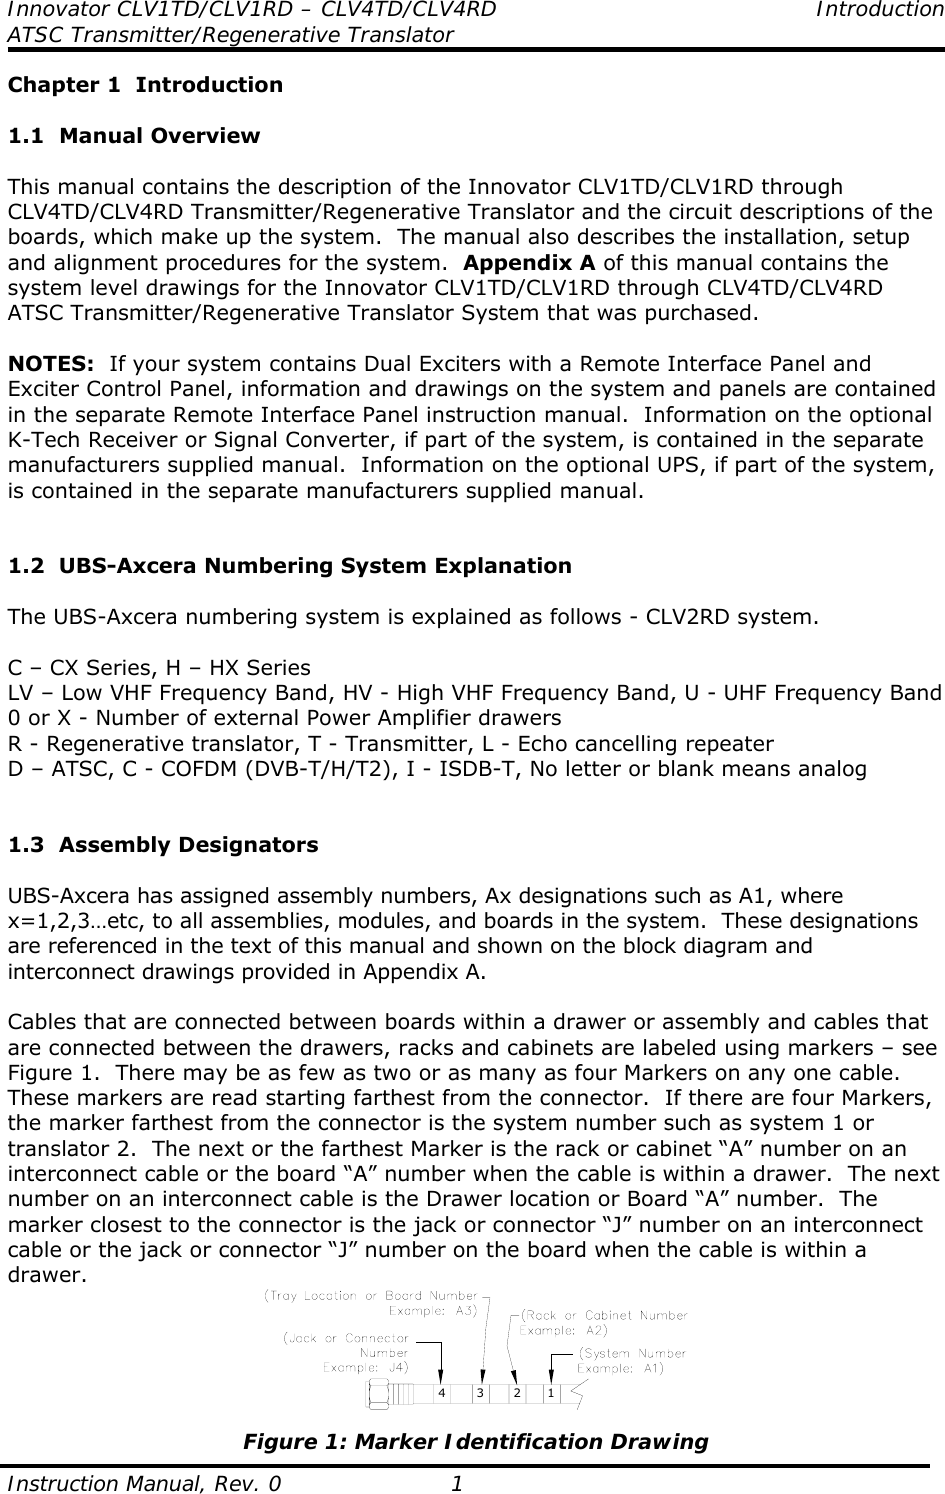 Innovator CLV1TD/CLV1RD – CLV4TD/CLV4RD Introduction ATSC Transmitter/Regenerative Translator  Instruction Manual, Rev. 0  1 Chapter 1  Introduction  1.1  Manual Overview  This manual contains the description of the Innovator CLV1TD/CLV1RD through CLV4TD/CLV4RD Transmitter/Regenerative Translator and the circuit descriptions of the boards, which make up the system.  The manual also describes the installation, setup and alignment procedures for the system.  Appendix A of this manual contains the system level drawings for the Innovator CLV1TD/CLV1RD through CLV4TD/CLV4RD ATSC Transmitter/Regenerative Translator System that was purchased.  NOTES:  If your system contains Dual Exciters with a Remote Interface Panel and Exciter Control Panel, information and drawings on the system and panels are contained in the separate Remote Interface Panel instruction manual.  Information on the optional K-Tech Receiver or Signal Converter, if part of the system, is contained in the separate manufacturers supplied manual.  Information on the optional UPS, if part of the system, is contained in the separate manufacturers supplied manual.   1.2  UBS-Axcera Numbering System Explanation  The UBS-Axcera numbering system is explained as follows - CLV2RD system.  C – CX Series, H – HX Series LV – Low VHF Frequency Band, HV - High VHF Frequency Band, U - UHF Frequency Band 0 or X - Number of external Power Amplifier drawers R - Regenerative translator, T - Transmitter, L - Echo cancelling repeater D – ATSC, C - COFDM (DVB-T/H/T2), I - ISDB-T, No letter or blank means analog   1.3  Assembly Designators  UBS-Axcera has assigned assembly numbers, Ax designations such as A1, where x=1,2,3…etc, to all assemblies, modules, and boards in the system.  These designations are referenced in the text of this manual and shown on the block diagram and interconnect drawings provided in Appendix A.  Cables that are connected between boards within a drawer or assembly and cables that are connected between the drawers, racks and cabinets are labeled using markers – see Figure 1.  There may be as few as two or as many as four Markers on any one cable.  These markers are read starting farthest from the connector.  If there are four Markers, the marker farthest from the connector is the system number such as system 1 or translator 2.  The next or the farthest Marker is the rack or cabinet “A” number on an interconnect cable or the board “A” number when the cable is within a drawer.  The next number on an interconnect cable is the Drawer location or Board “A” number.  The marker closest to the connector is the jack or connector “J” number on an interconnect cable or the jack or connector “J” number on the board when the cable is within a drawer. 4321 Figure 1: Marker Identification Drawing 